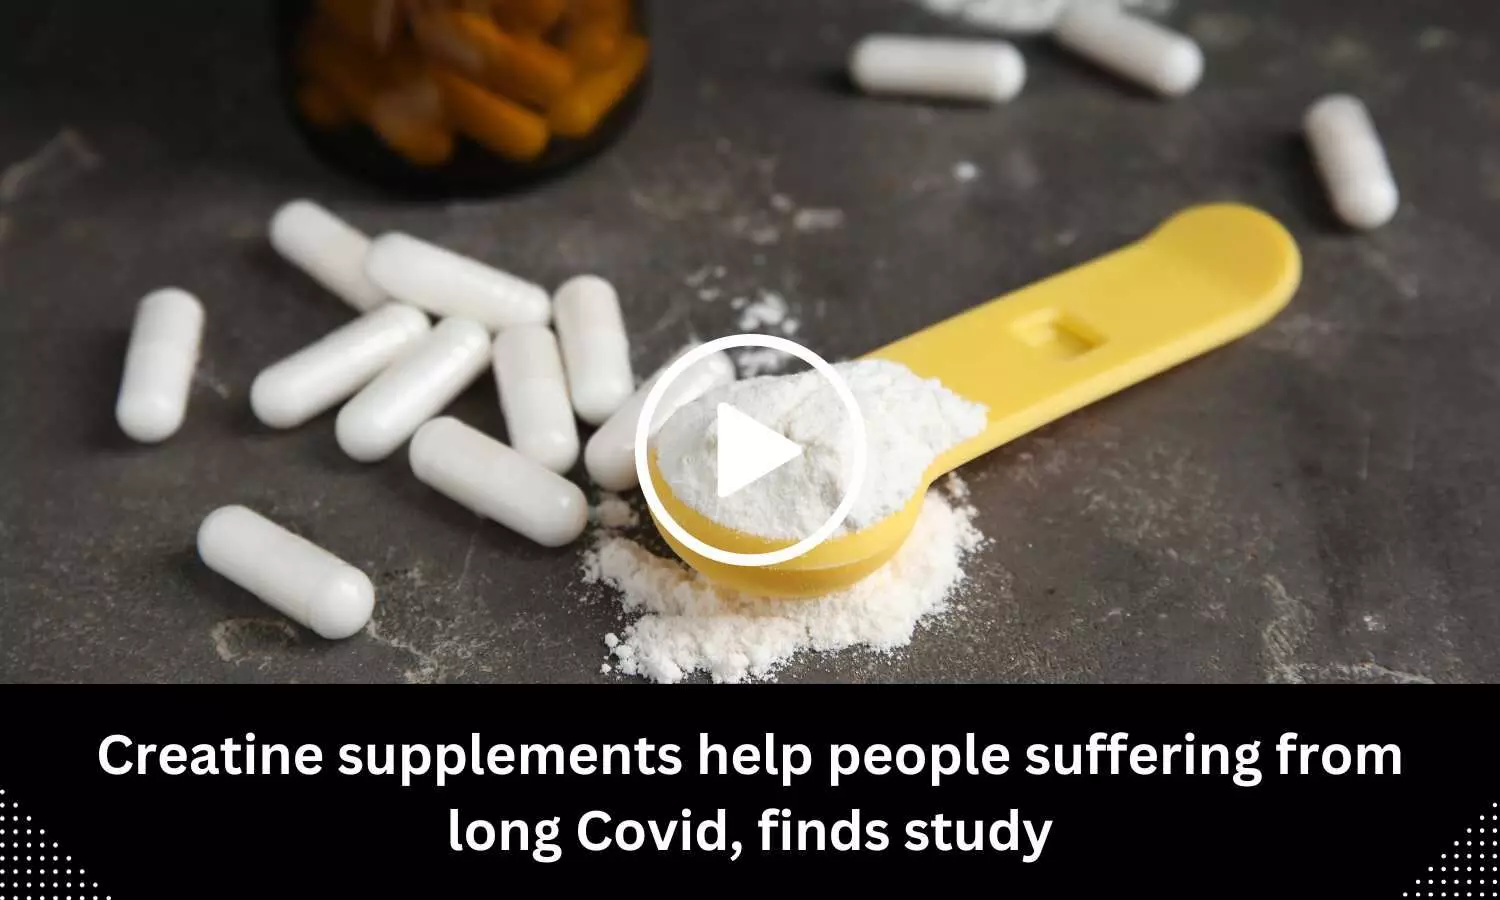 Creatine supplements help people suffering from long Covid, finds study